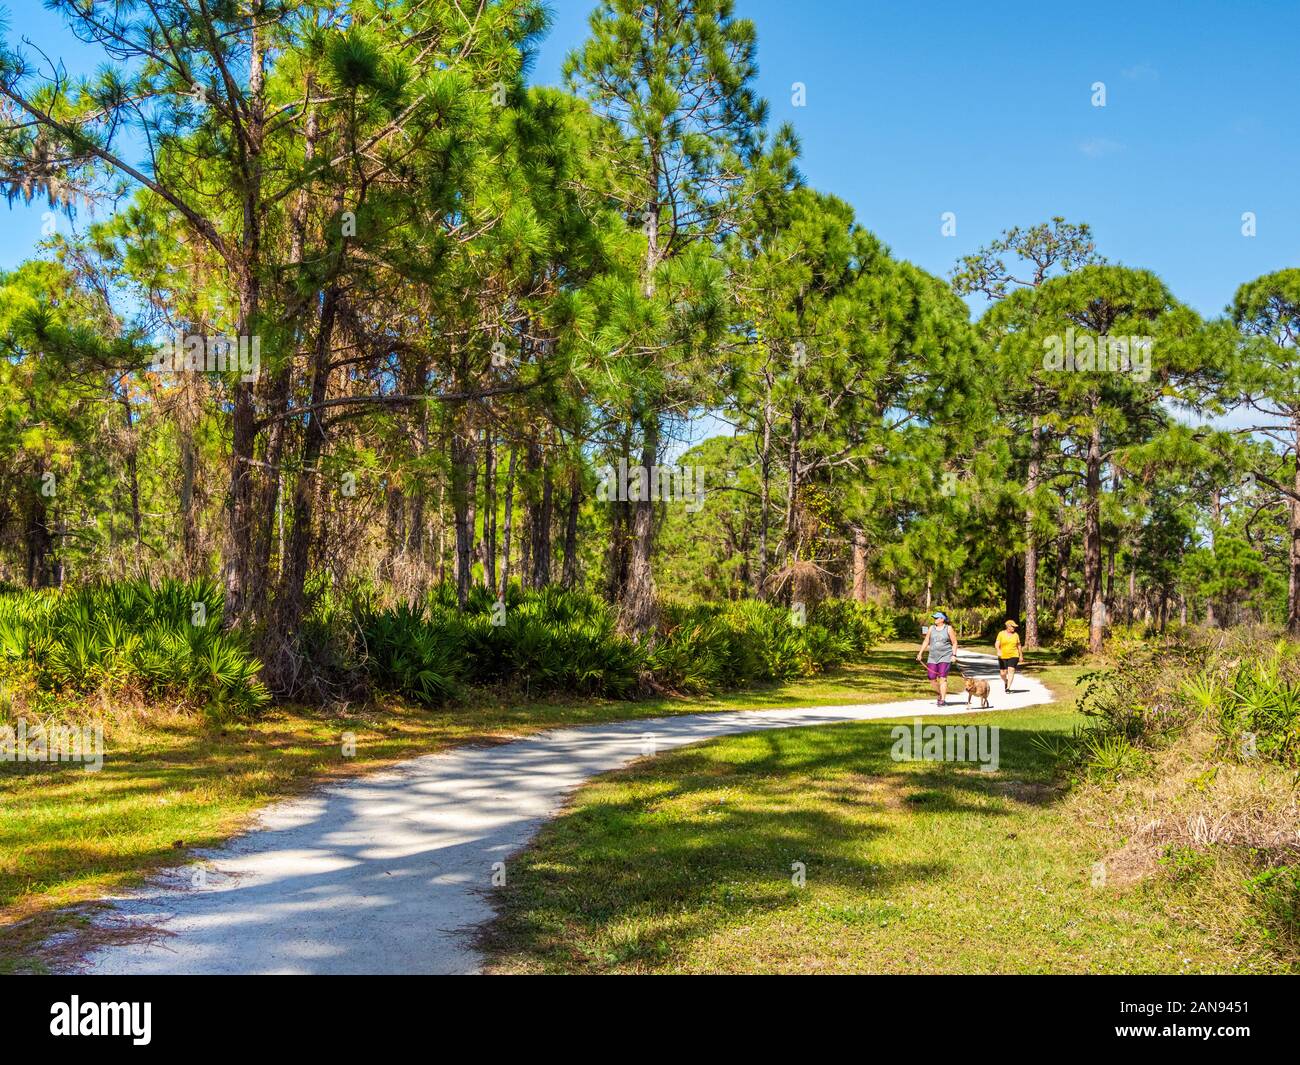 People walking on Eagle trail in Lemon Bay Park in Englewood Florida, United States Stock Photo